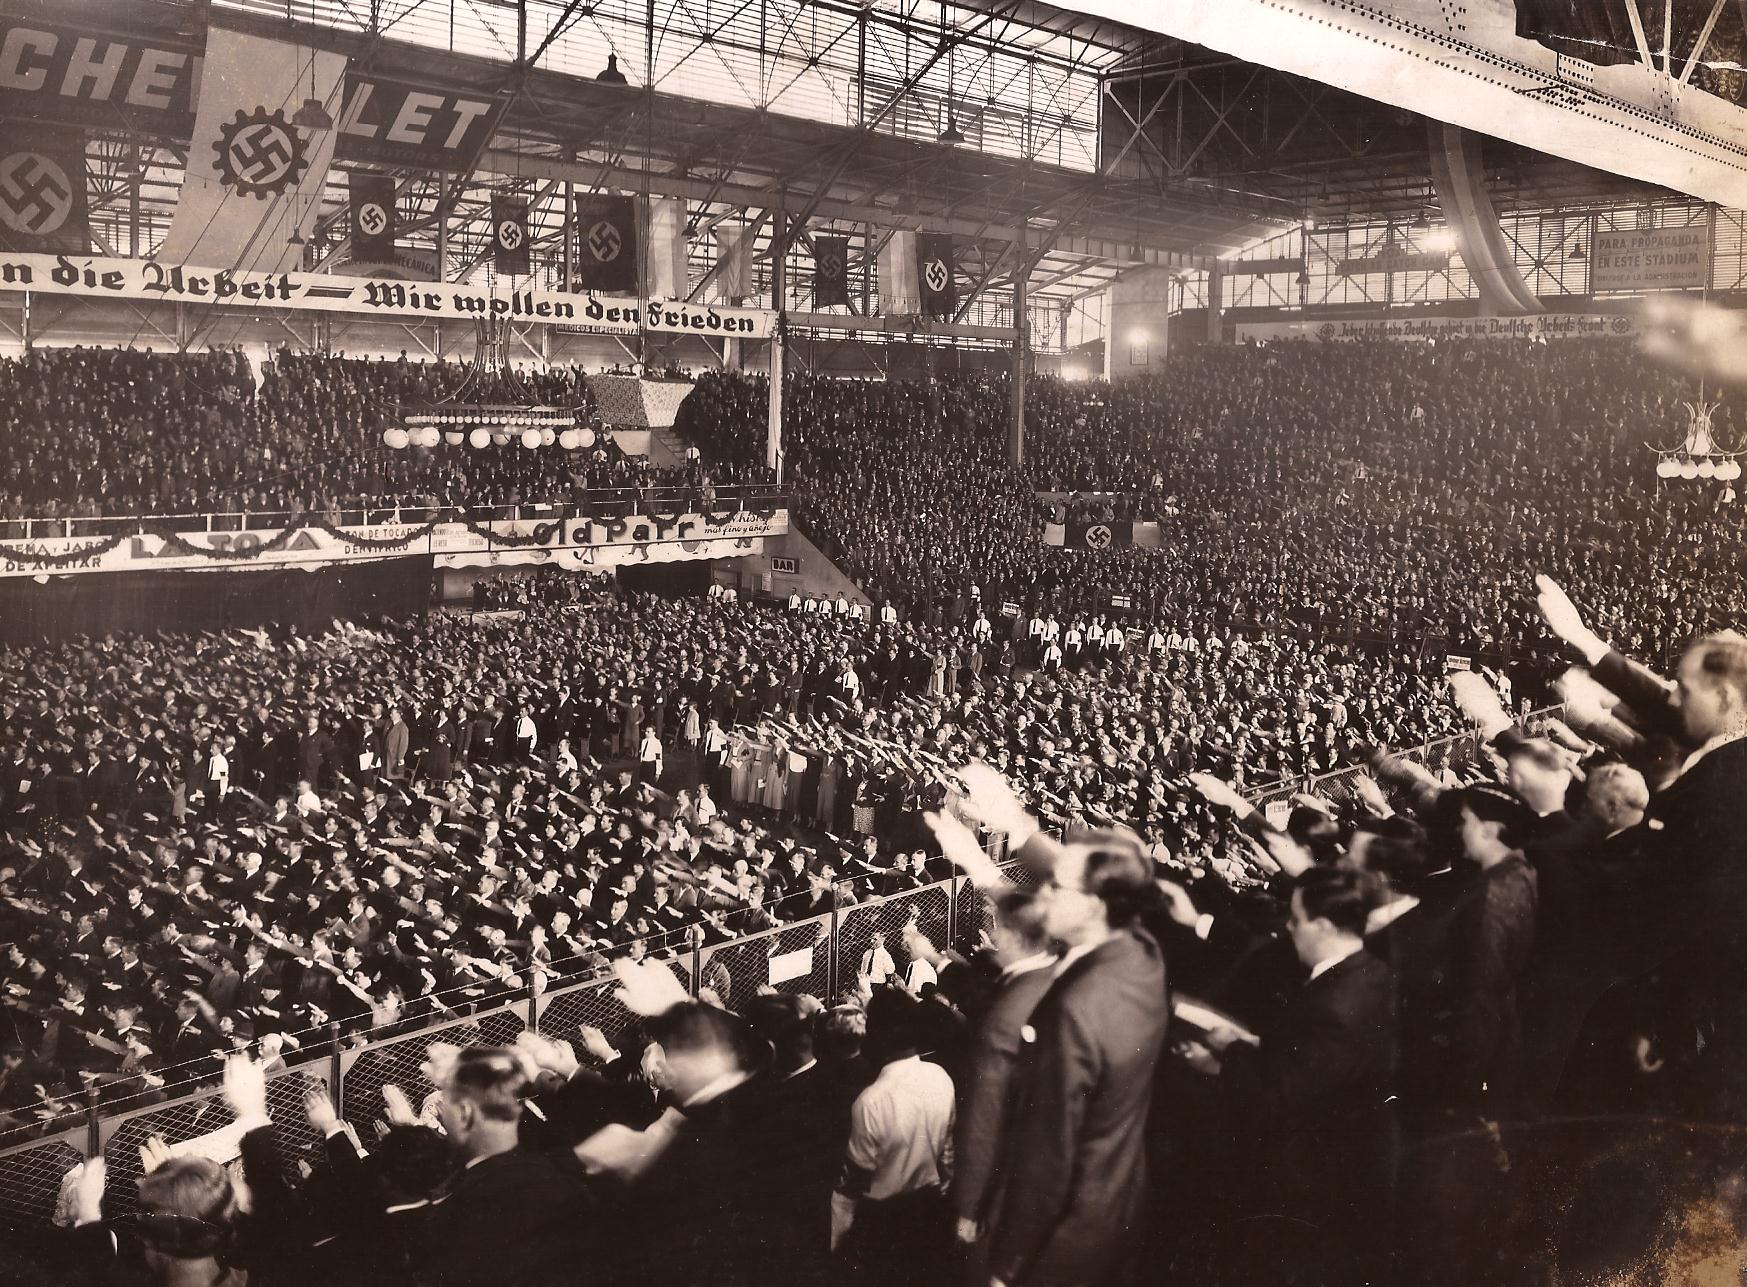 A stadium hosts 20,000 supporters during a Nazi rally in Buenos Aires, Argentina in 1938.